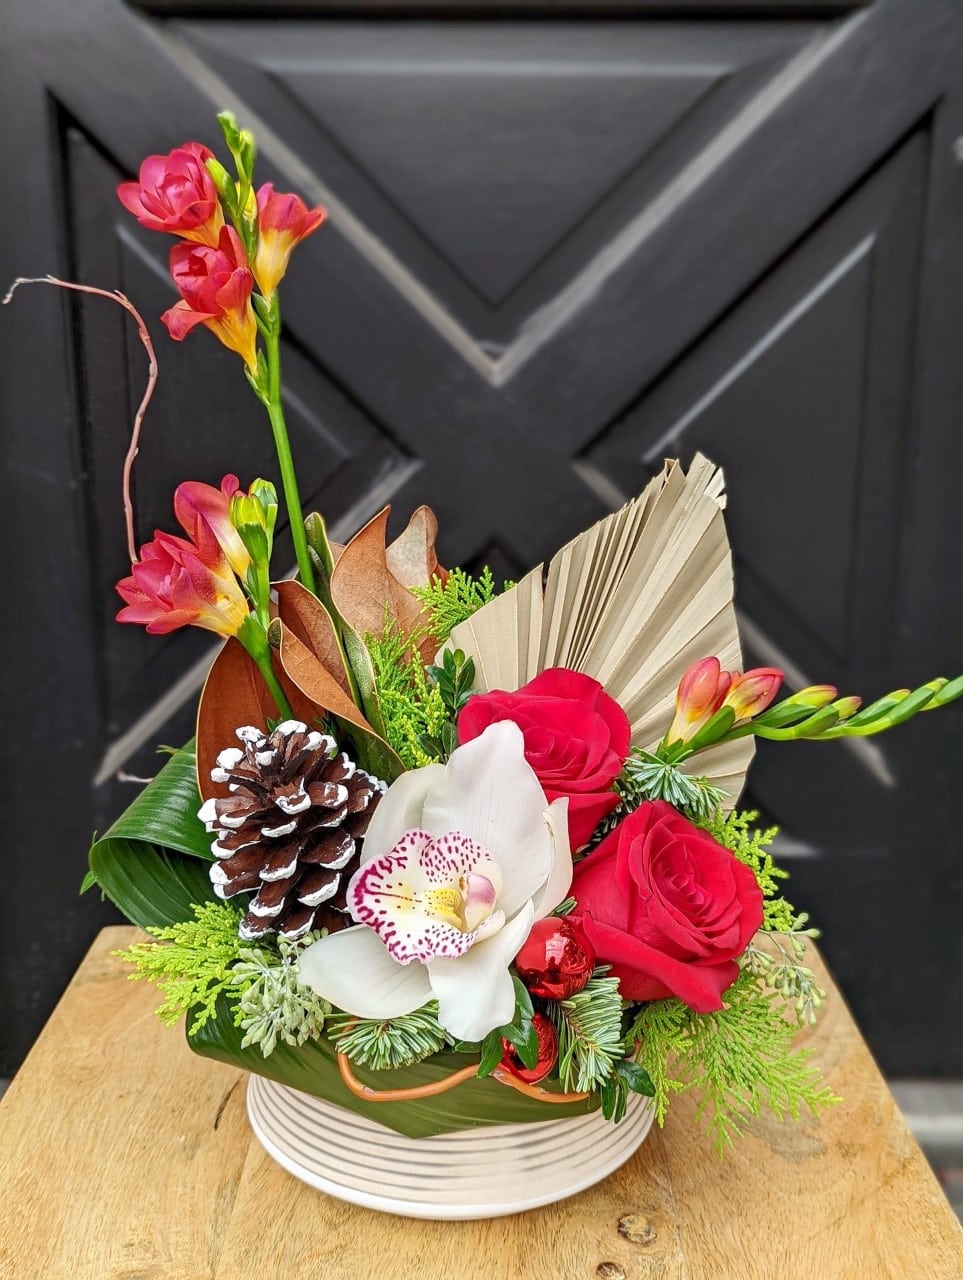 The Watering Can | A European style arrangement with bright red roses and freesia, blush orchids, pine cones, and a palm spear amongst winter greens.